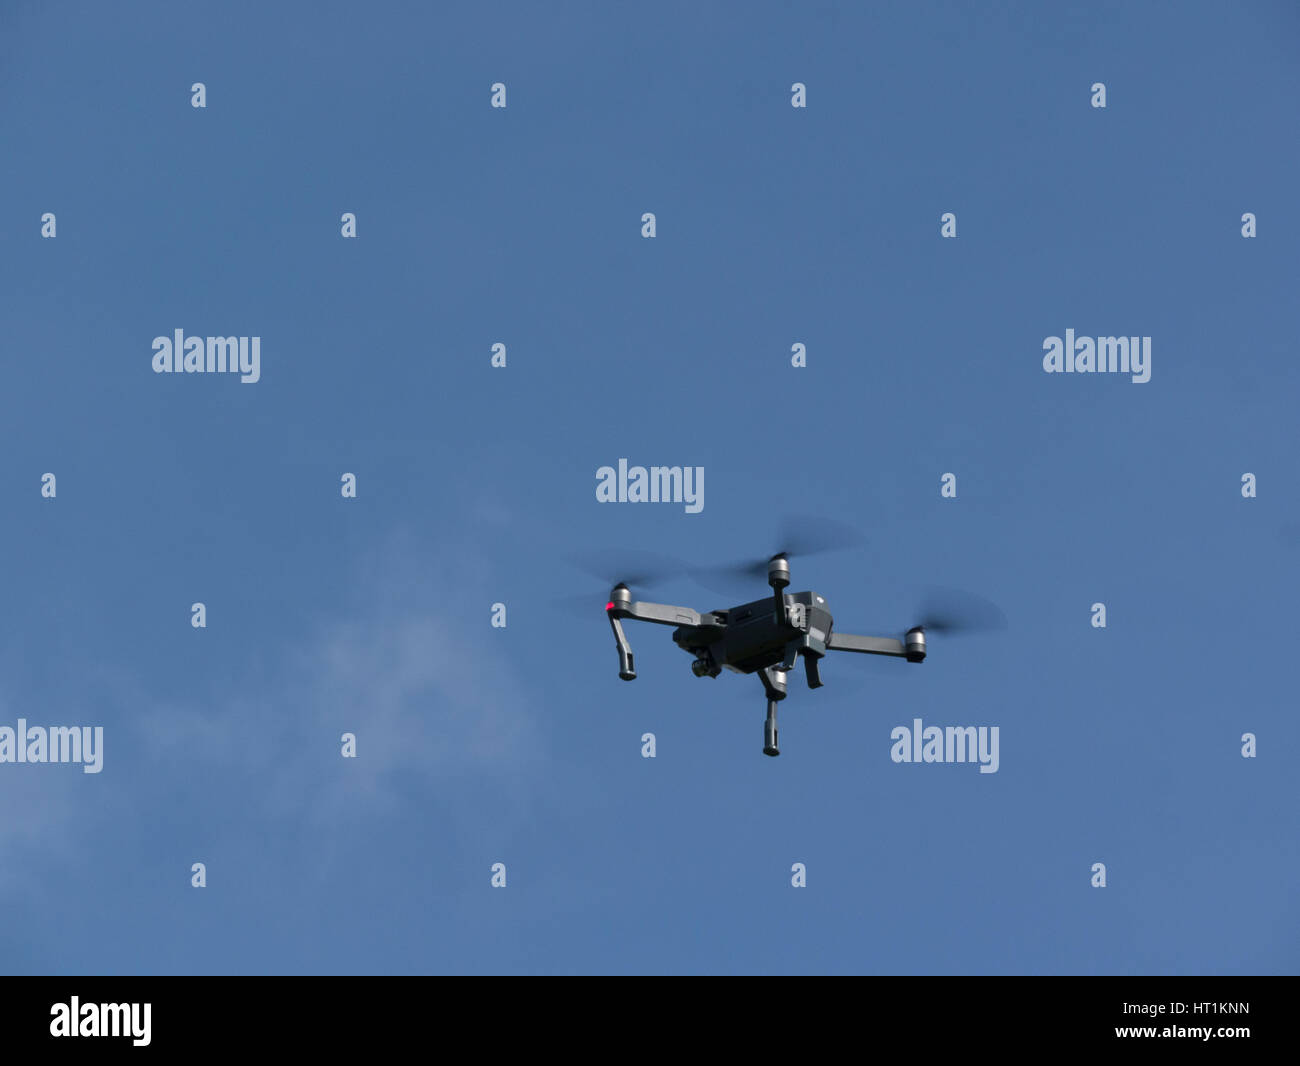 Drone flying in clear blue sky taking photographs Unmanned aerial vehicle intelligent flight system motion-sensitive auto stabilizers ultra portable Stock Photo